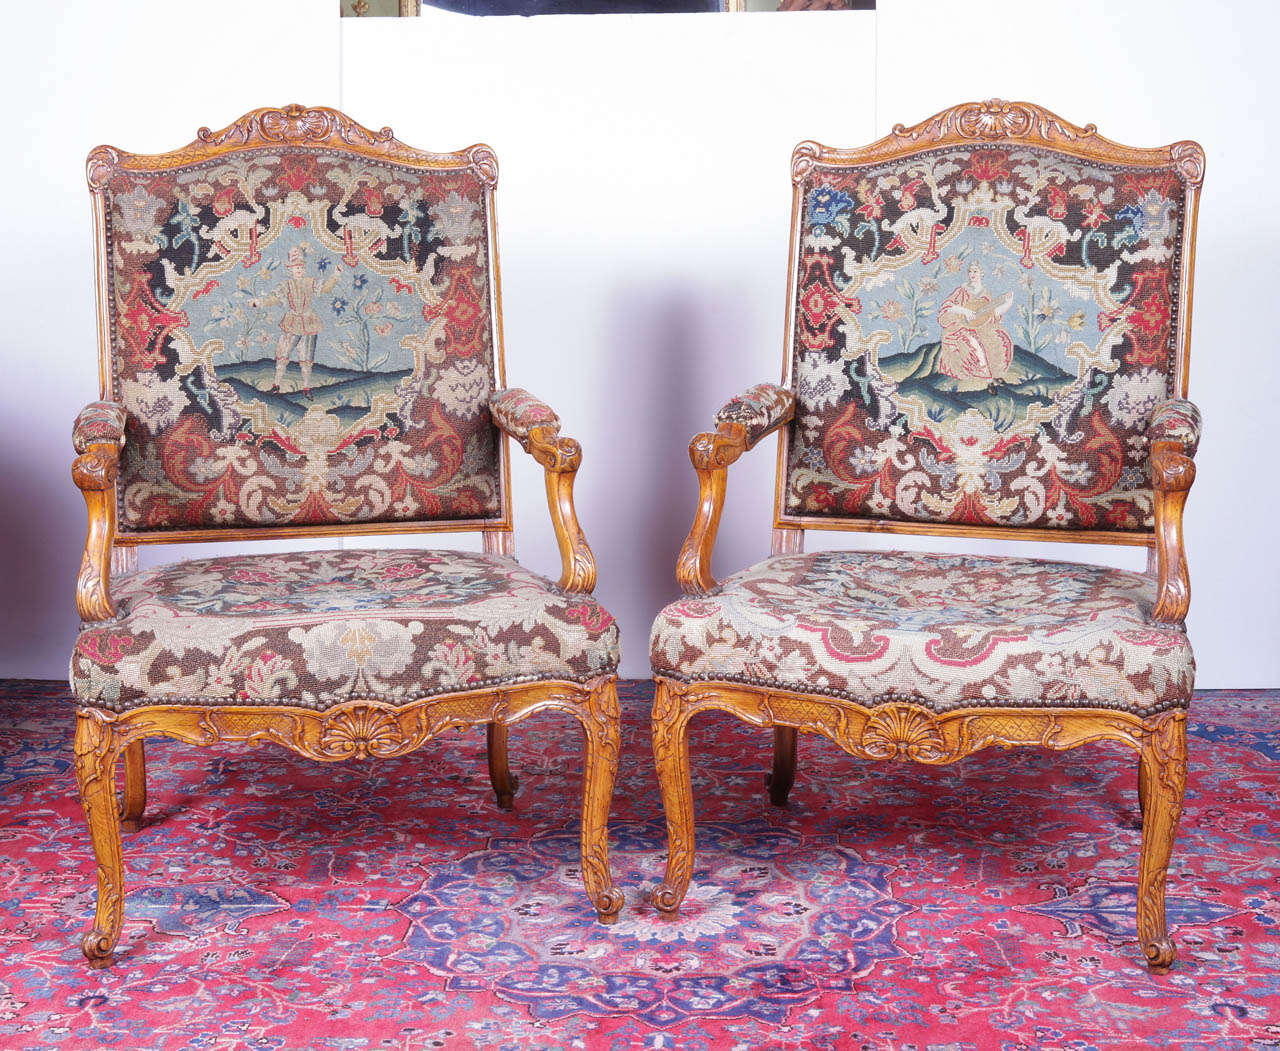 pair of 18th c hand carved Fruitwood hand pegged tapestry chairs. Tapestry mid 19th c